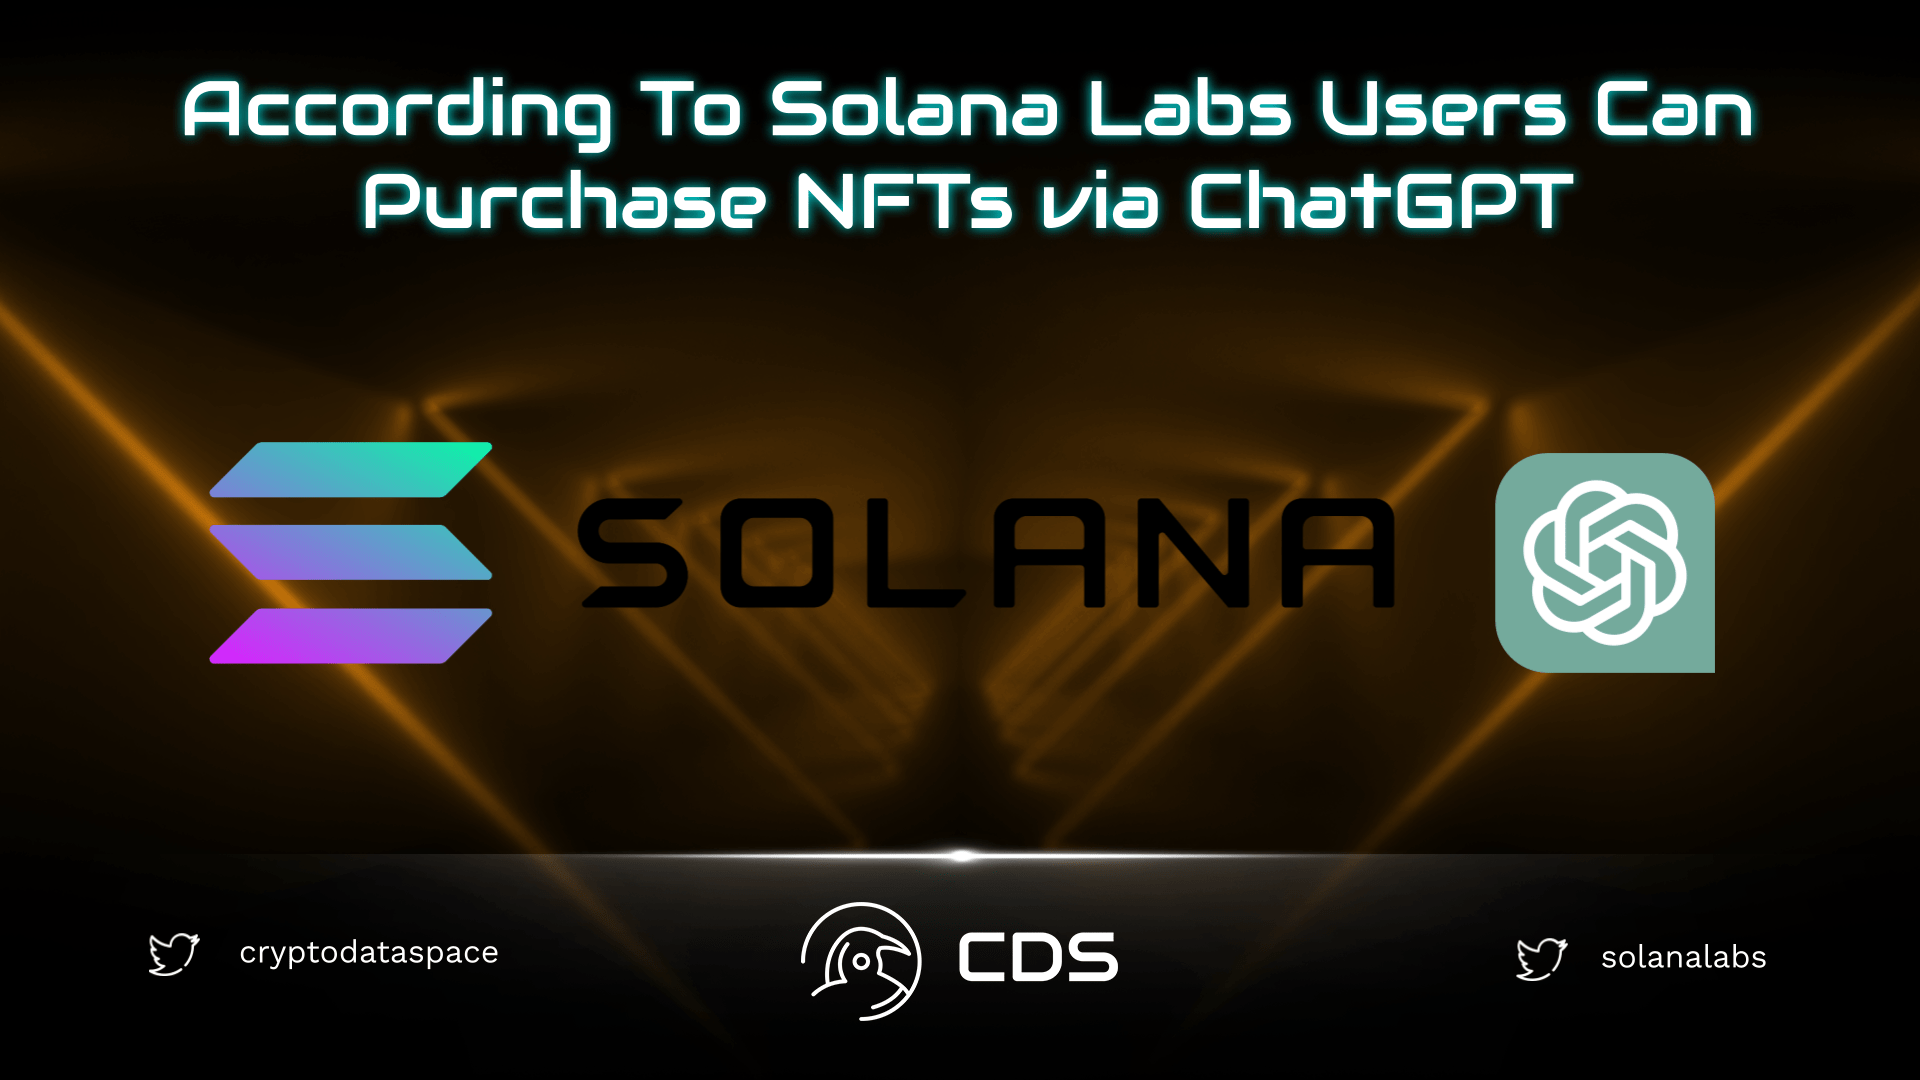 According To Solana Labs Users Can Purchase NFTs via ChatGPT